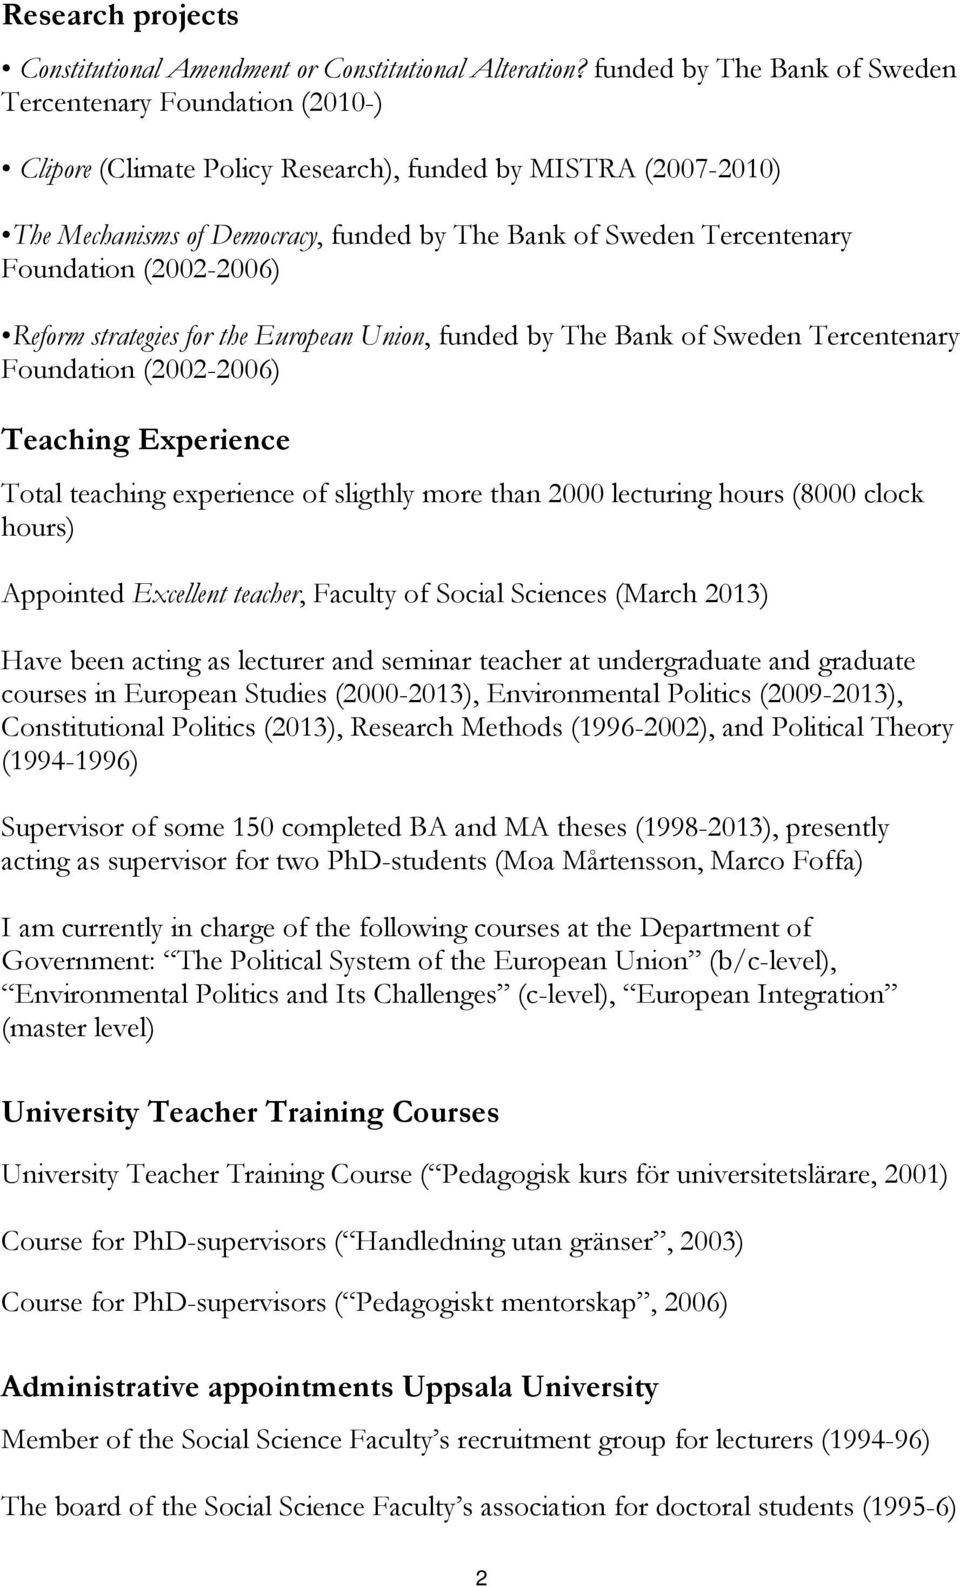 Foundation (2002-2006) Reform strategies for the European Union, funded by The Bank of Sweden Tercentenary Foundation (2002-2006) Teaching Experience Total teaching experience of sligthly more than